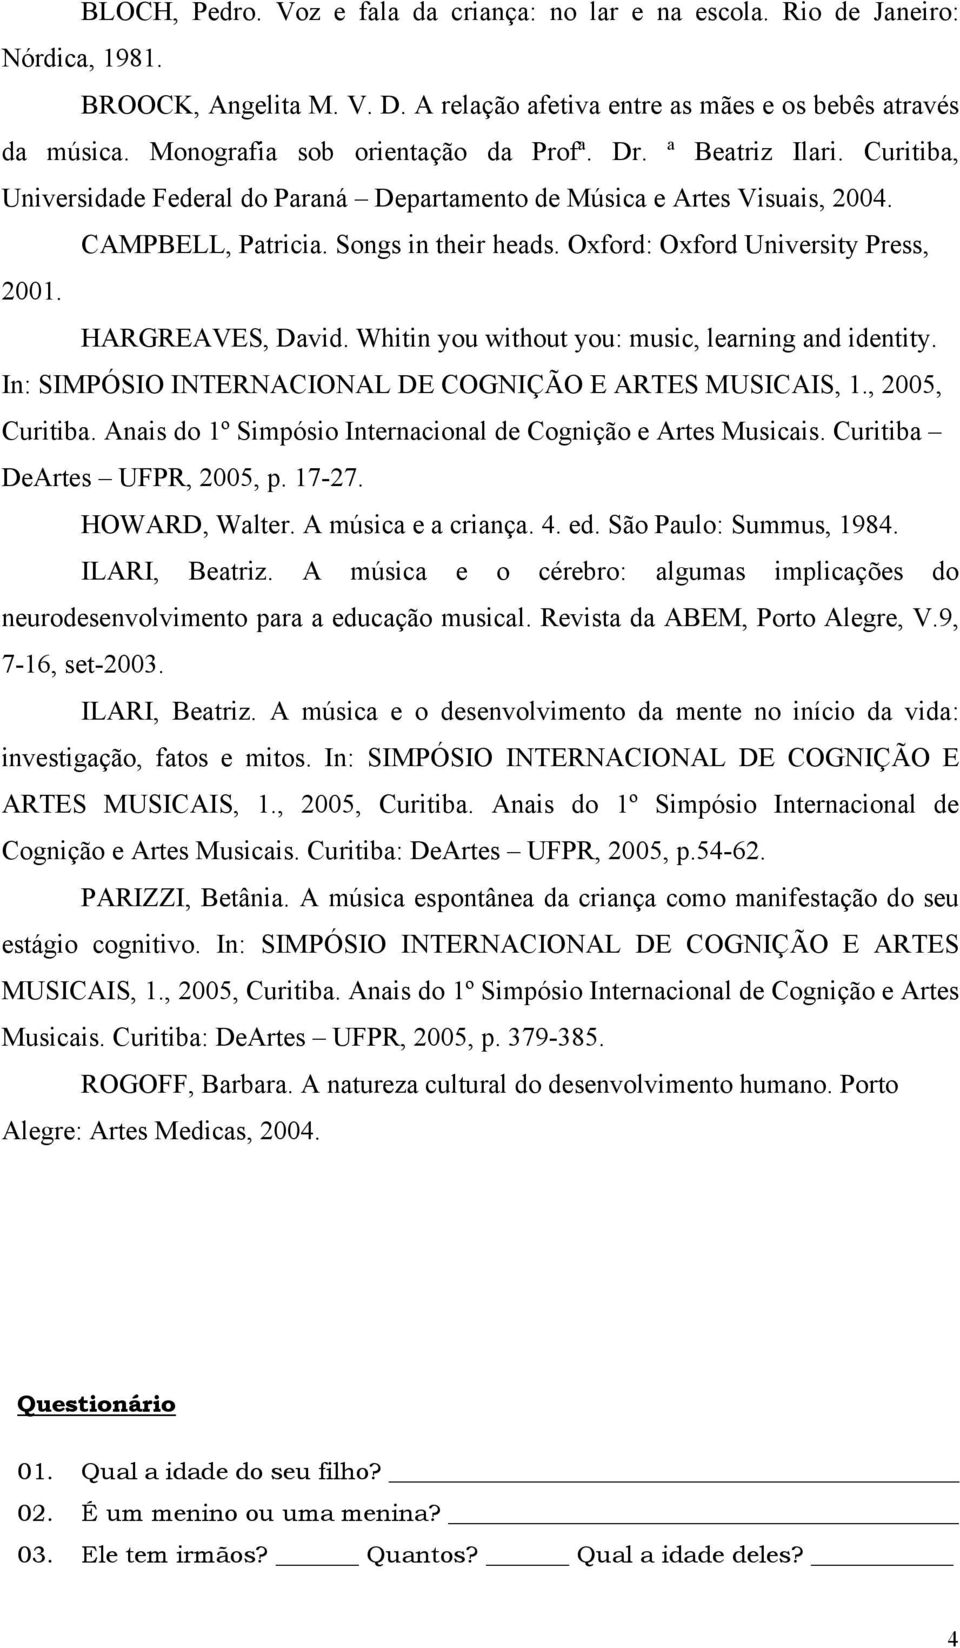 Oxford: Oxford University Press, 2001. HARGREAVES, David. Whitin you without you: music, learning and identity. In: SIMPÓSIO INTERNACIONAL DE COGNIÇÃO E ARTES MUSICAIS, 1., 2005, Curitiba.